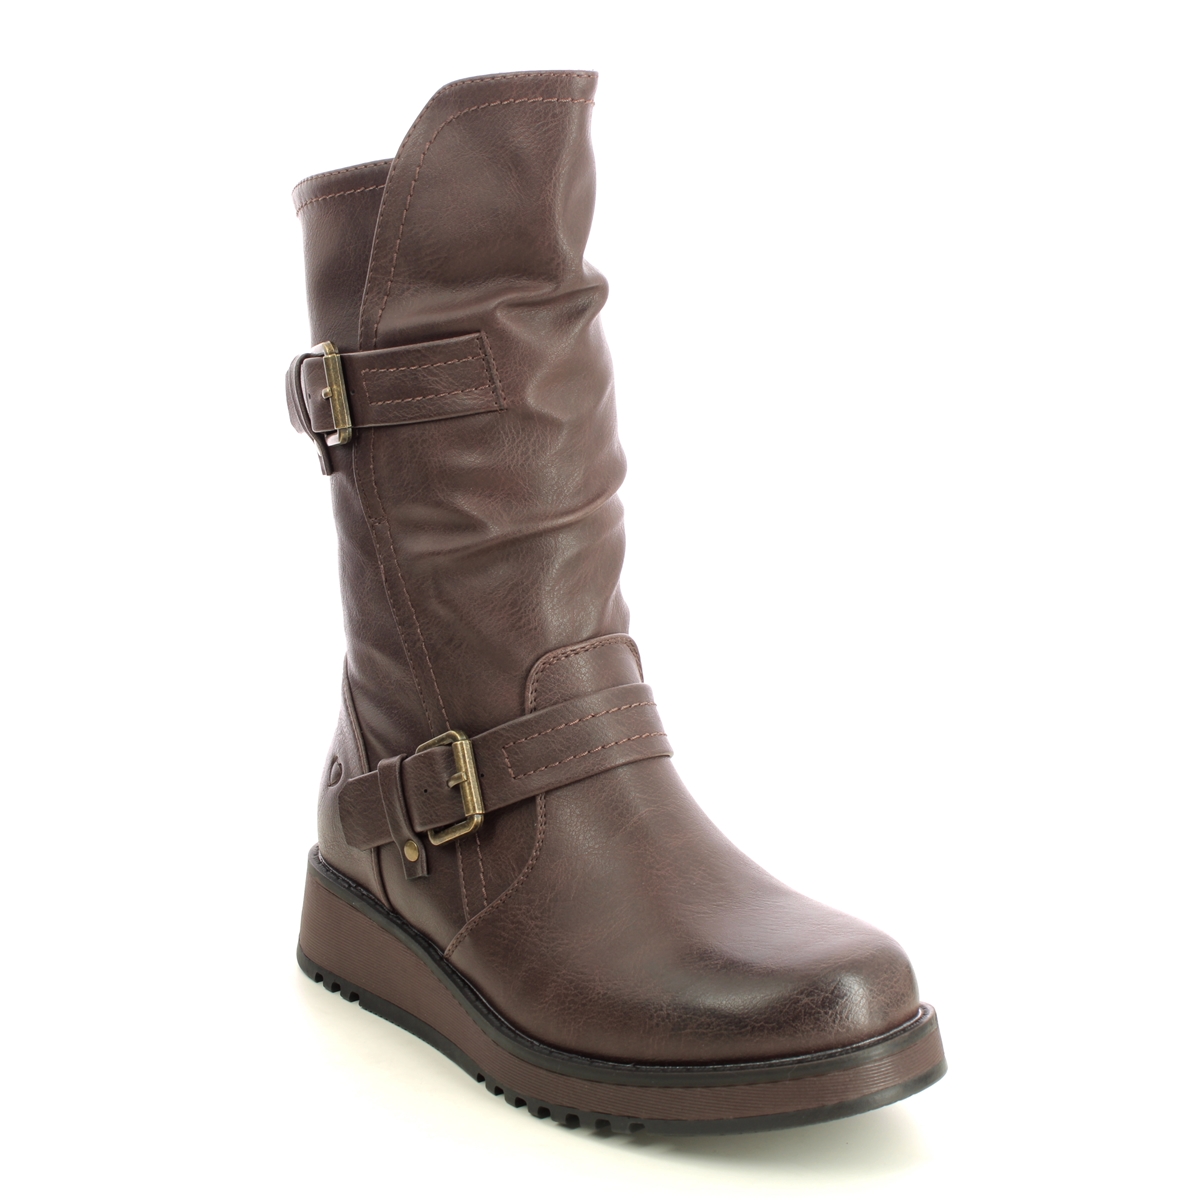 Heavenly Feet Hannah 4 Chocolate Brown Womens Mid Calf Boots 3507-27 In Size 3 In Plain Chocolate Brown